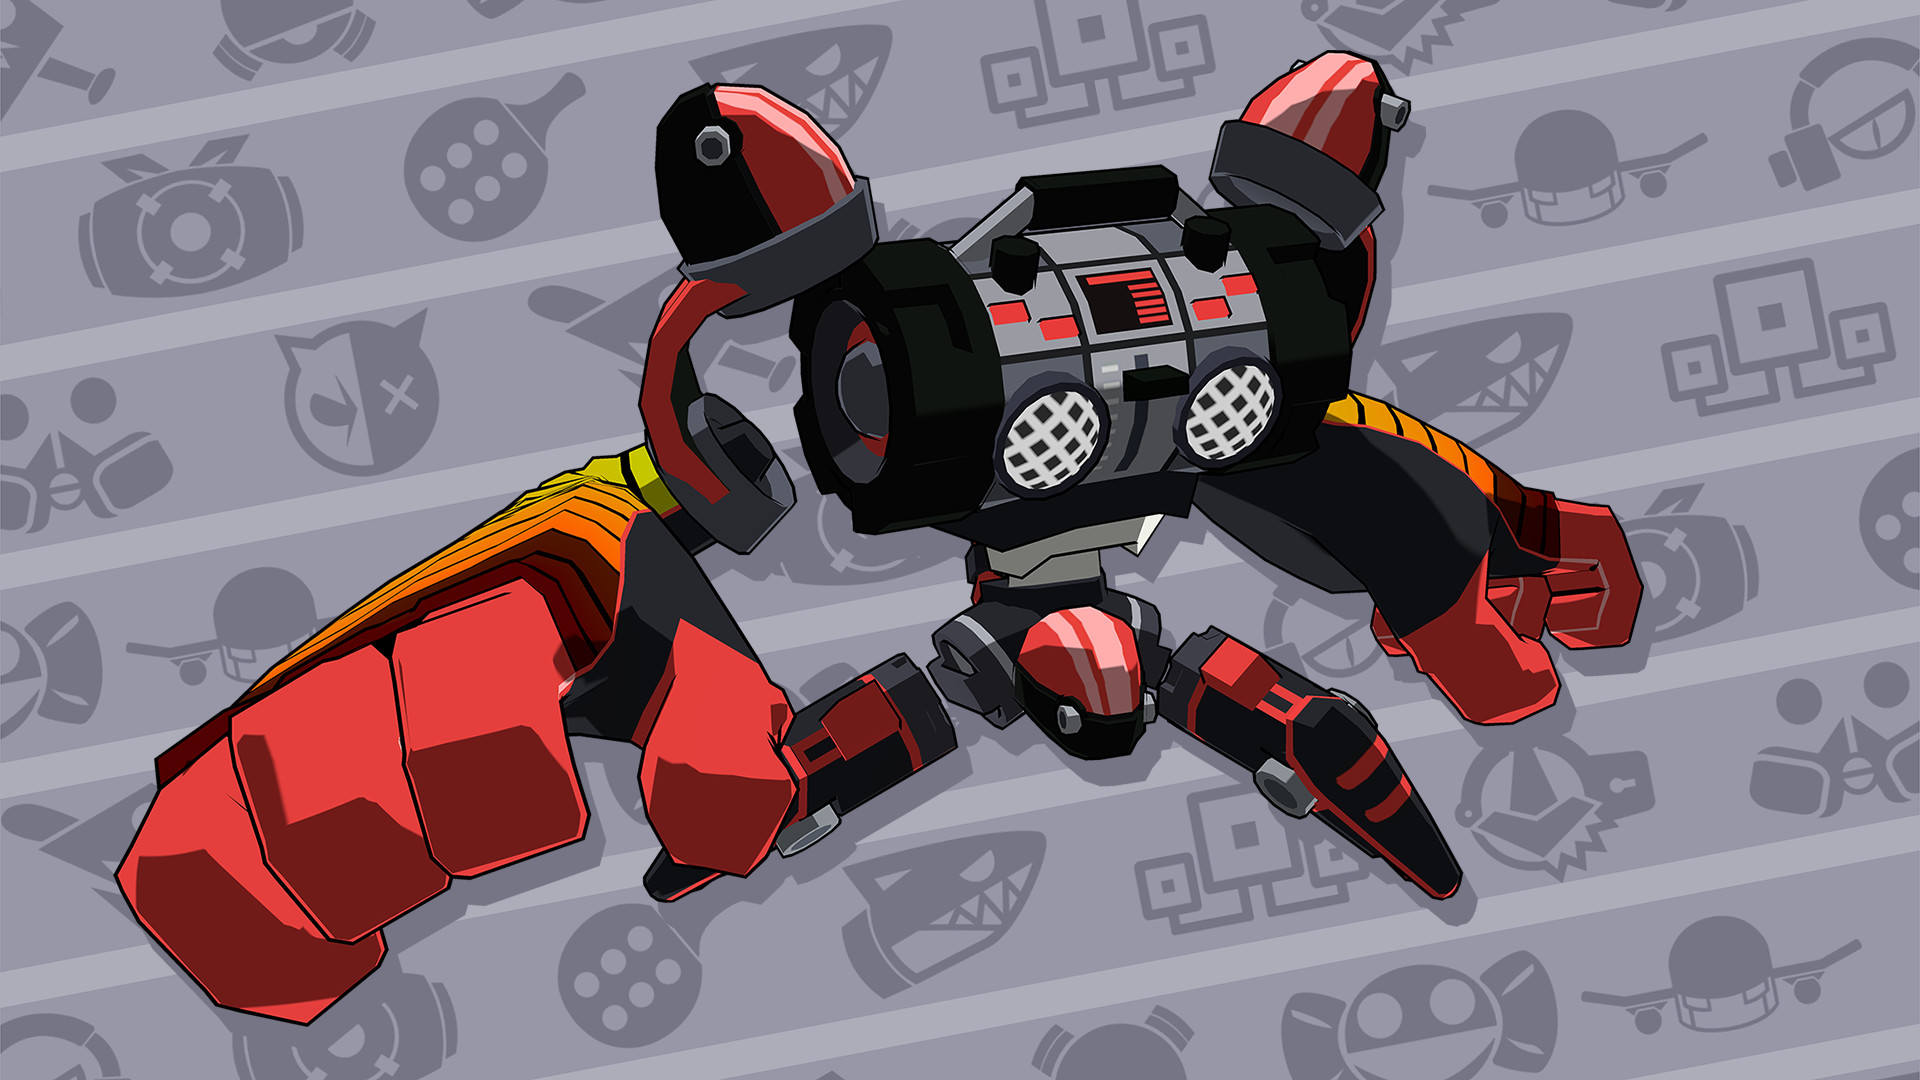 Lethal League Blaze - Gigahertz Visualizer X outfit for Doombox Featured Screenshot #1